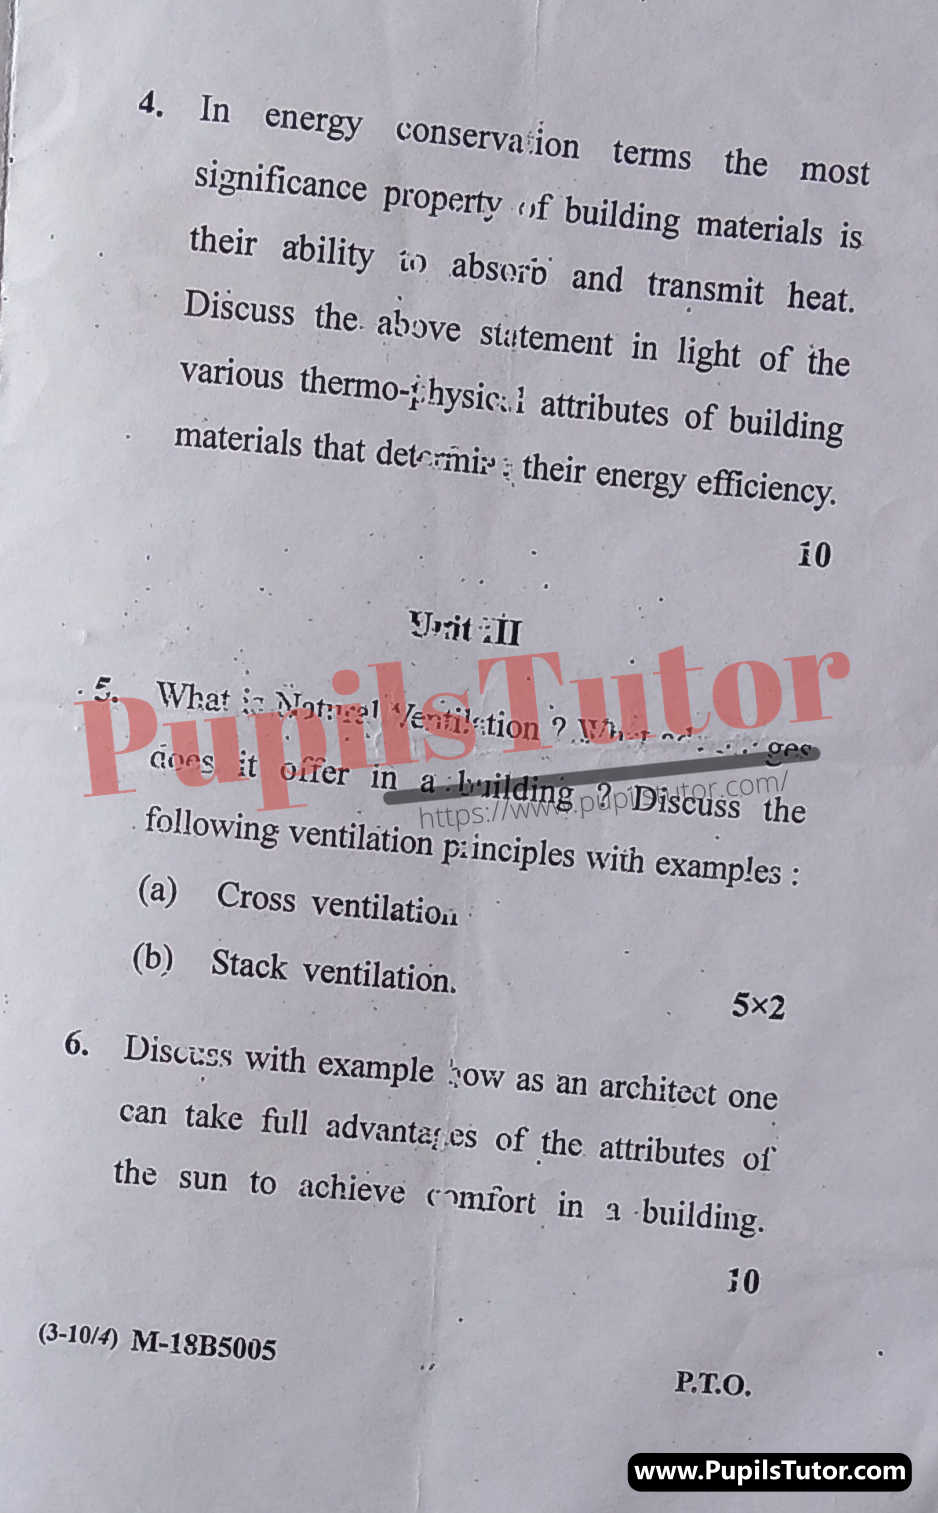 Free Download PDF Of Deenbandhu Chhotu Ram University of Science and Technology (DCRUST) BArch (B. Architecture) Second Semester Latest Question Paper For Climate Responsive Architecture Subject (Page 3) - https://www.pupilstutor.com